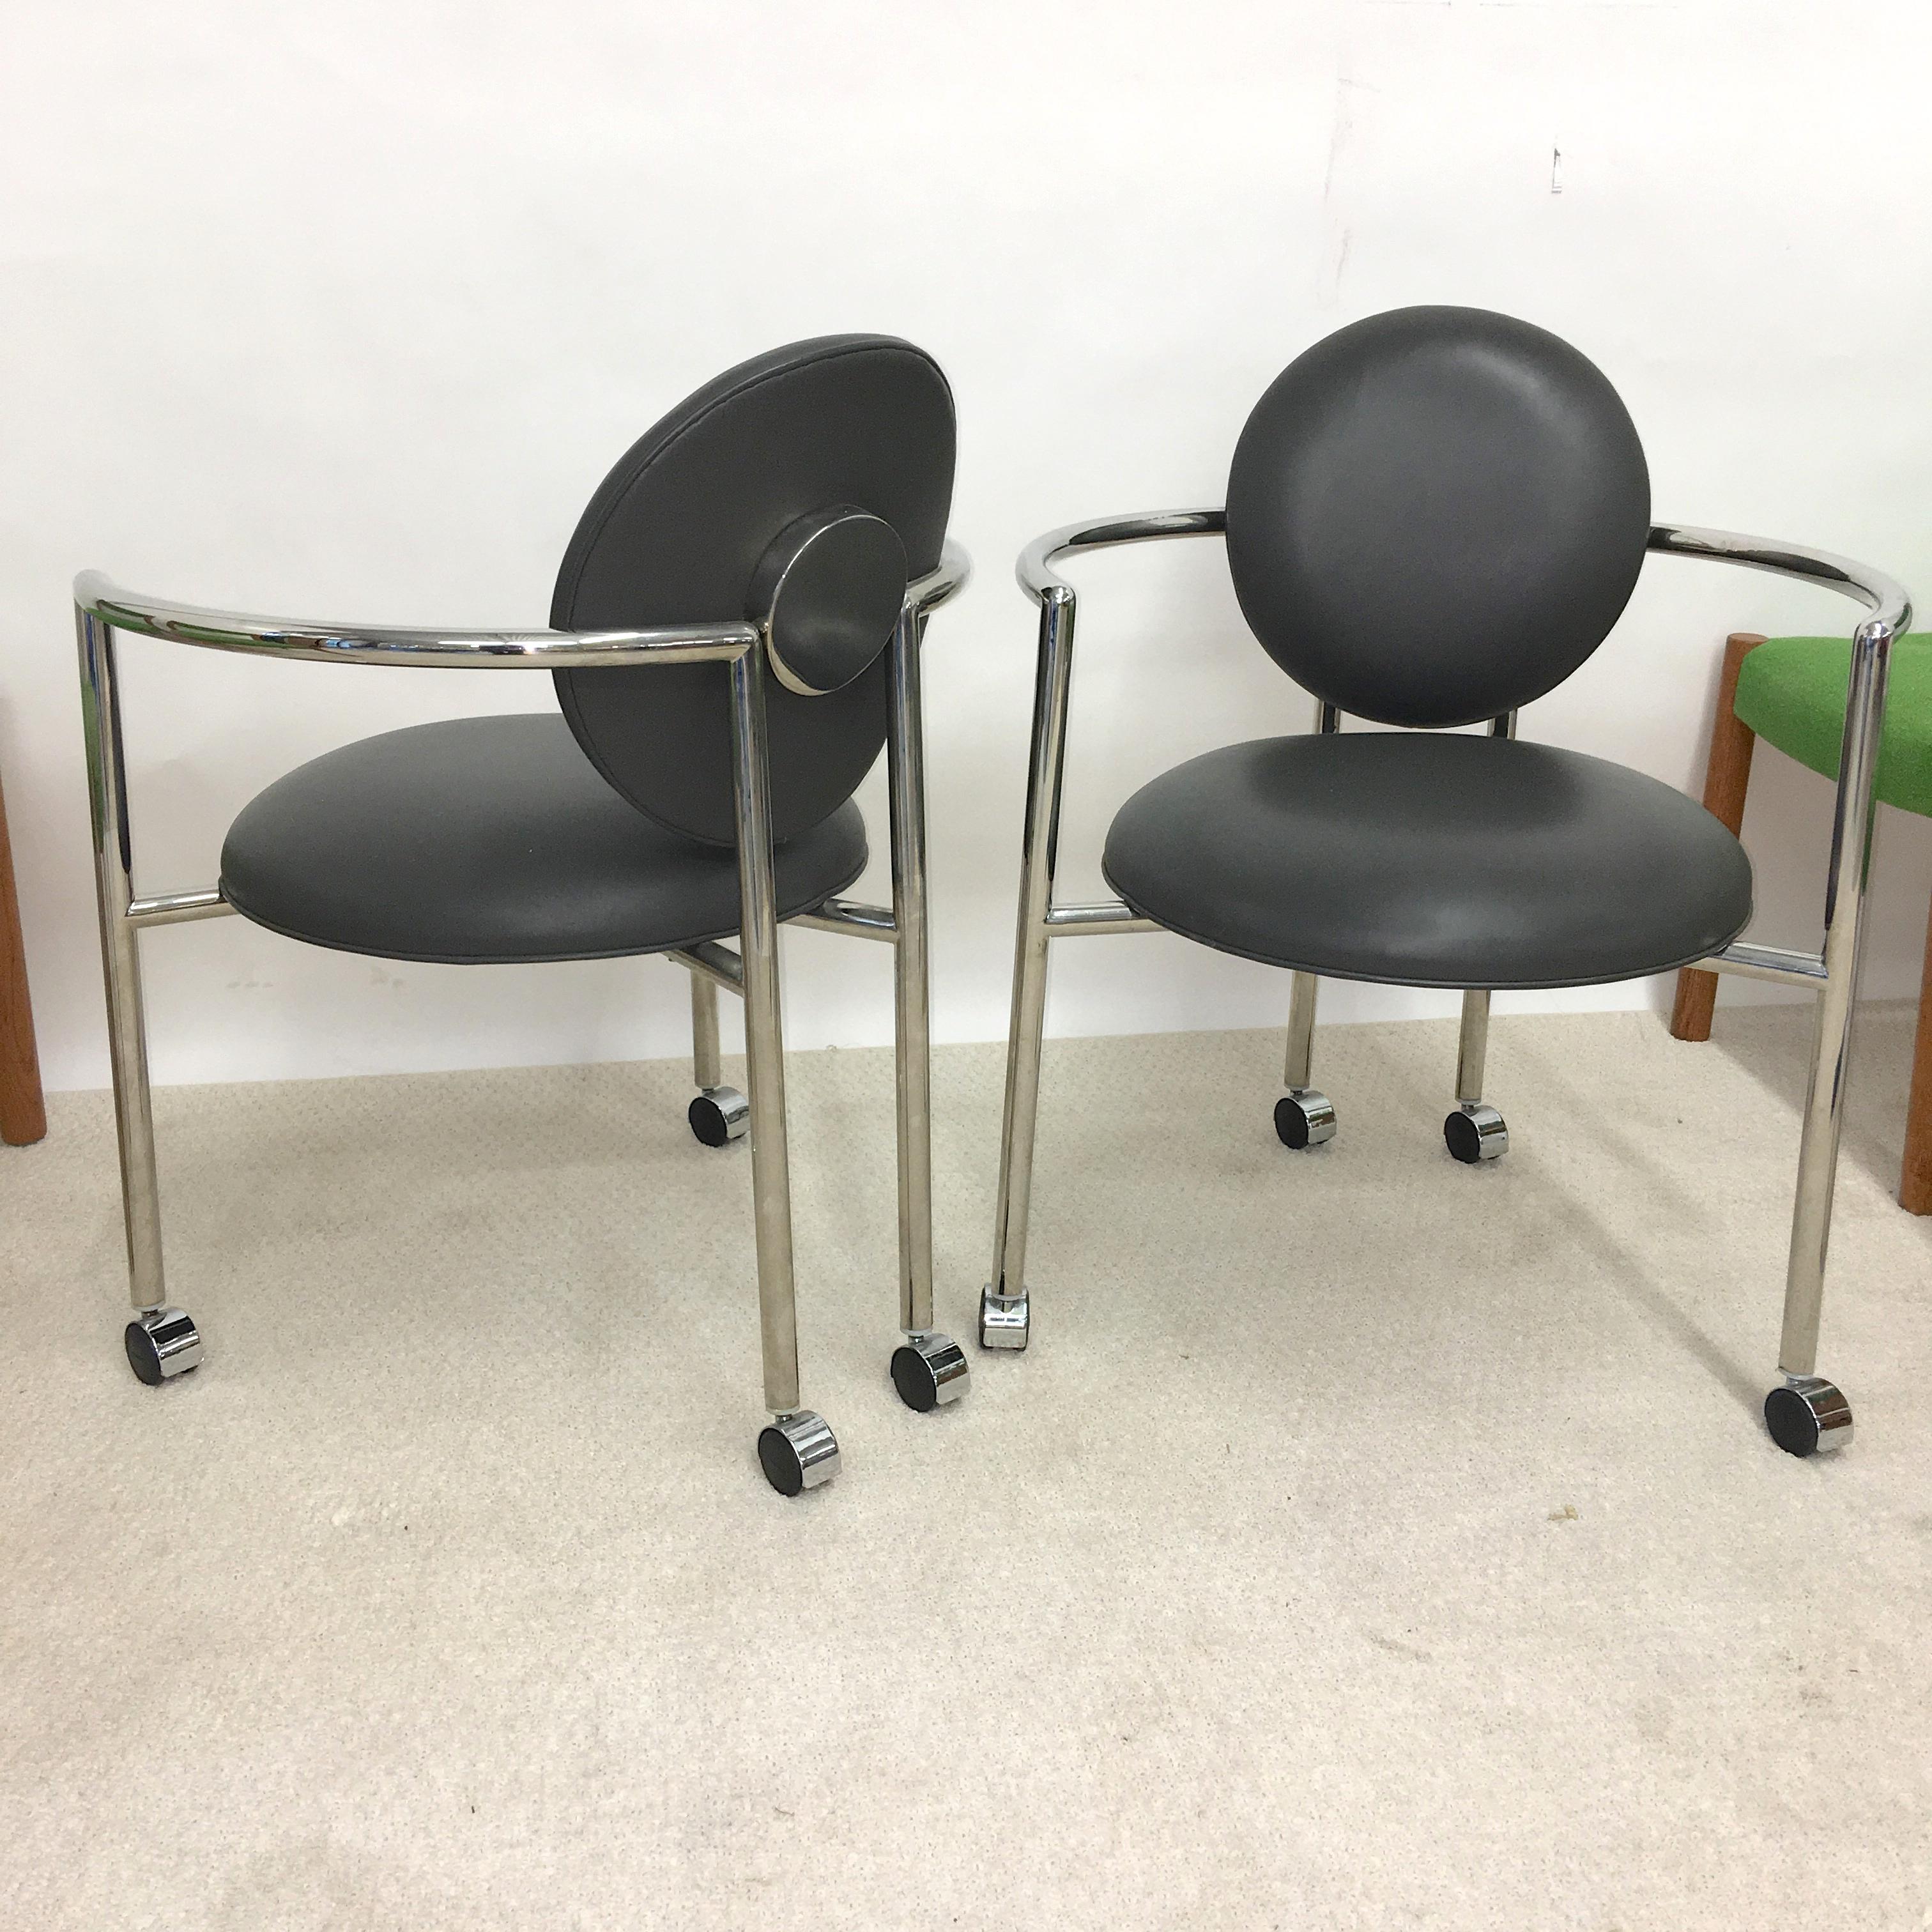 Late 20th Century Pair of Moon Chairs by Stanley Jay Friedman for Brueton